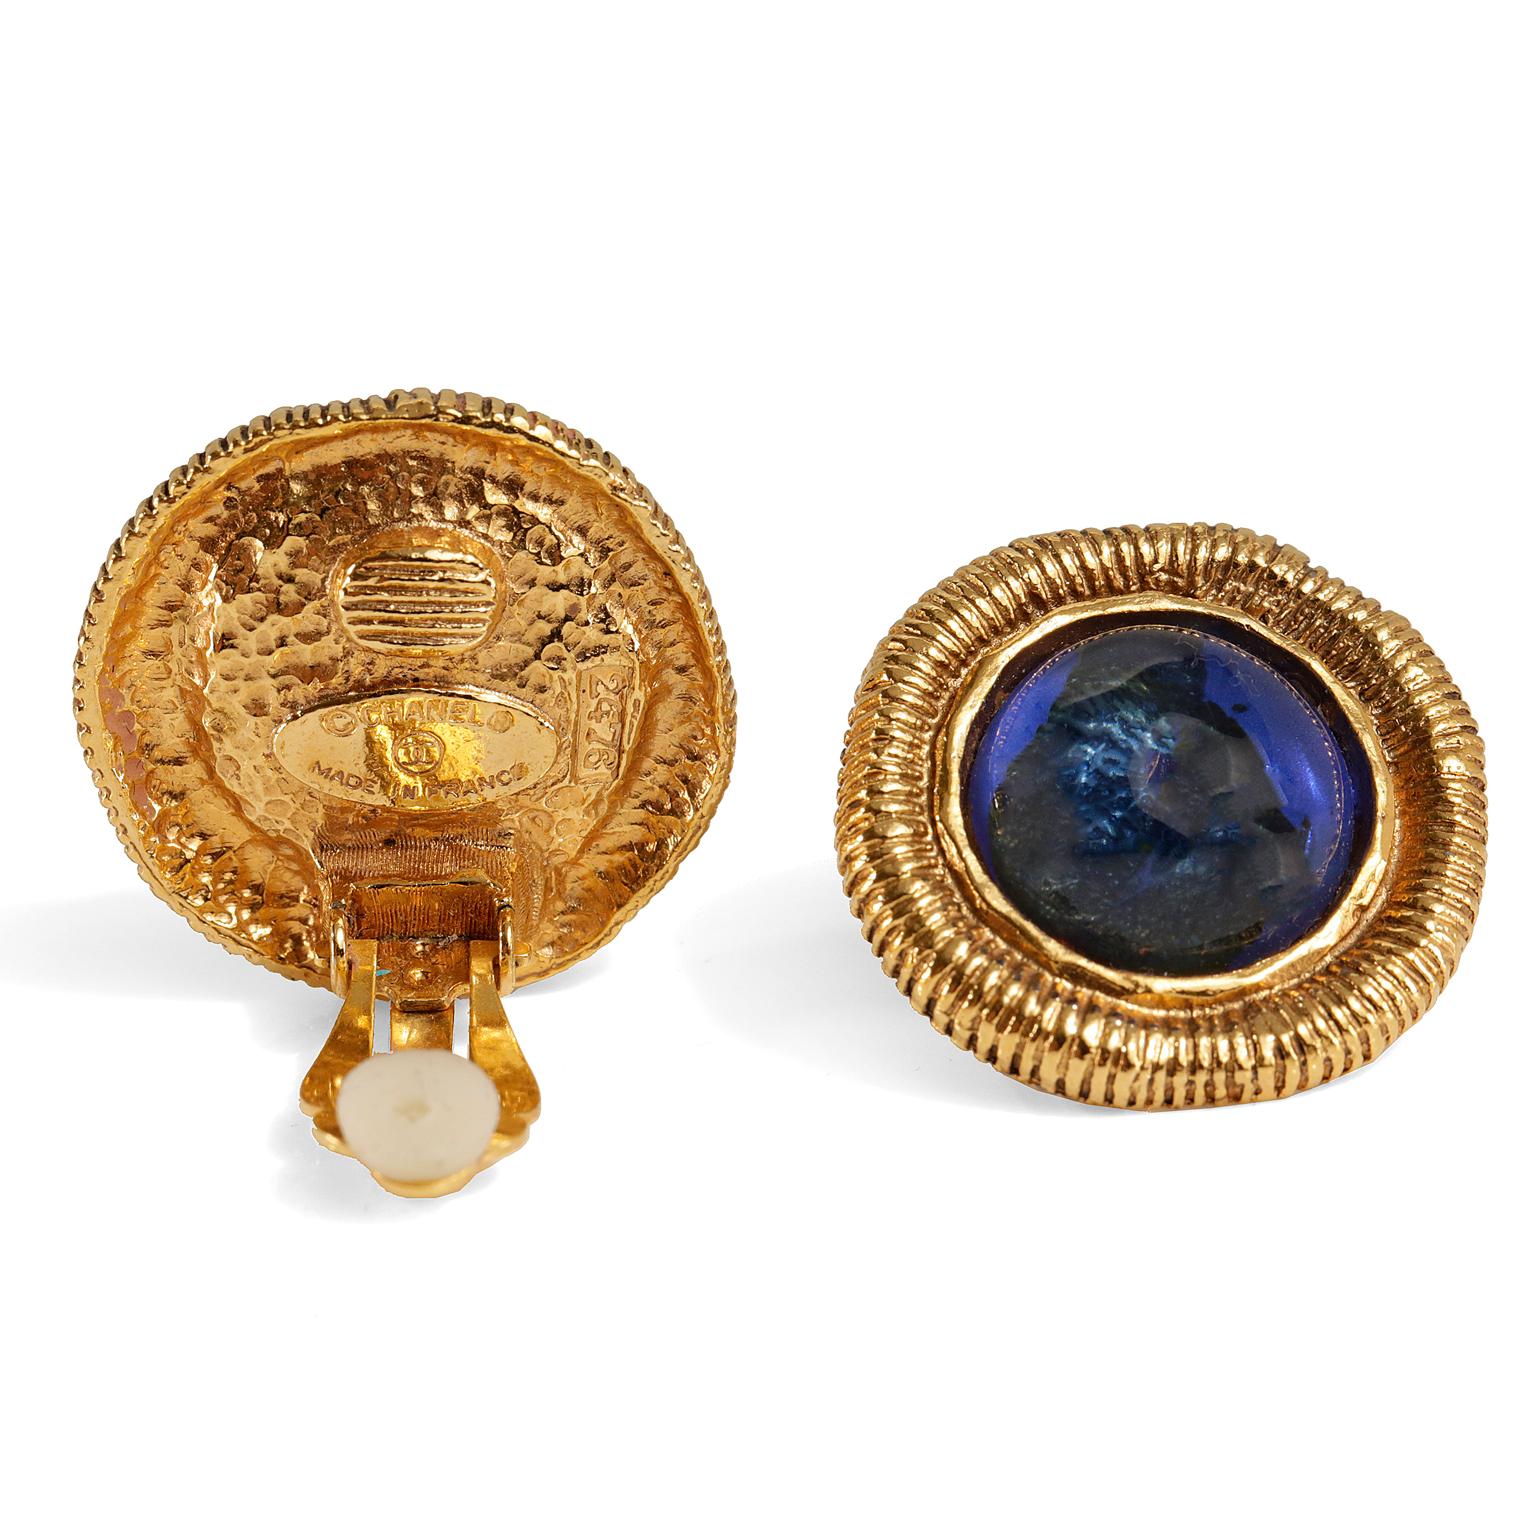 Chanel Blue Gripoix Gold Clip On Earrings-  excellent condition
Cobalt blue gripoix round stone in gold tone ribbed surround.  Clip on style. 1983, made in France.  

